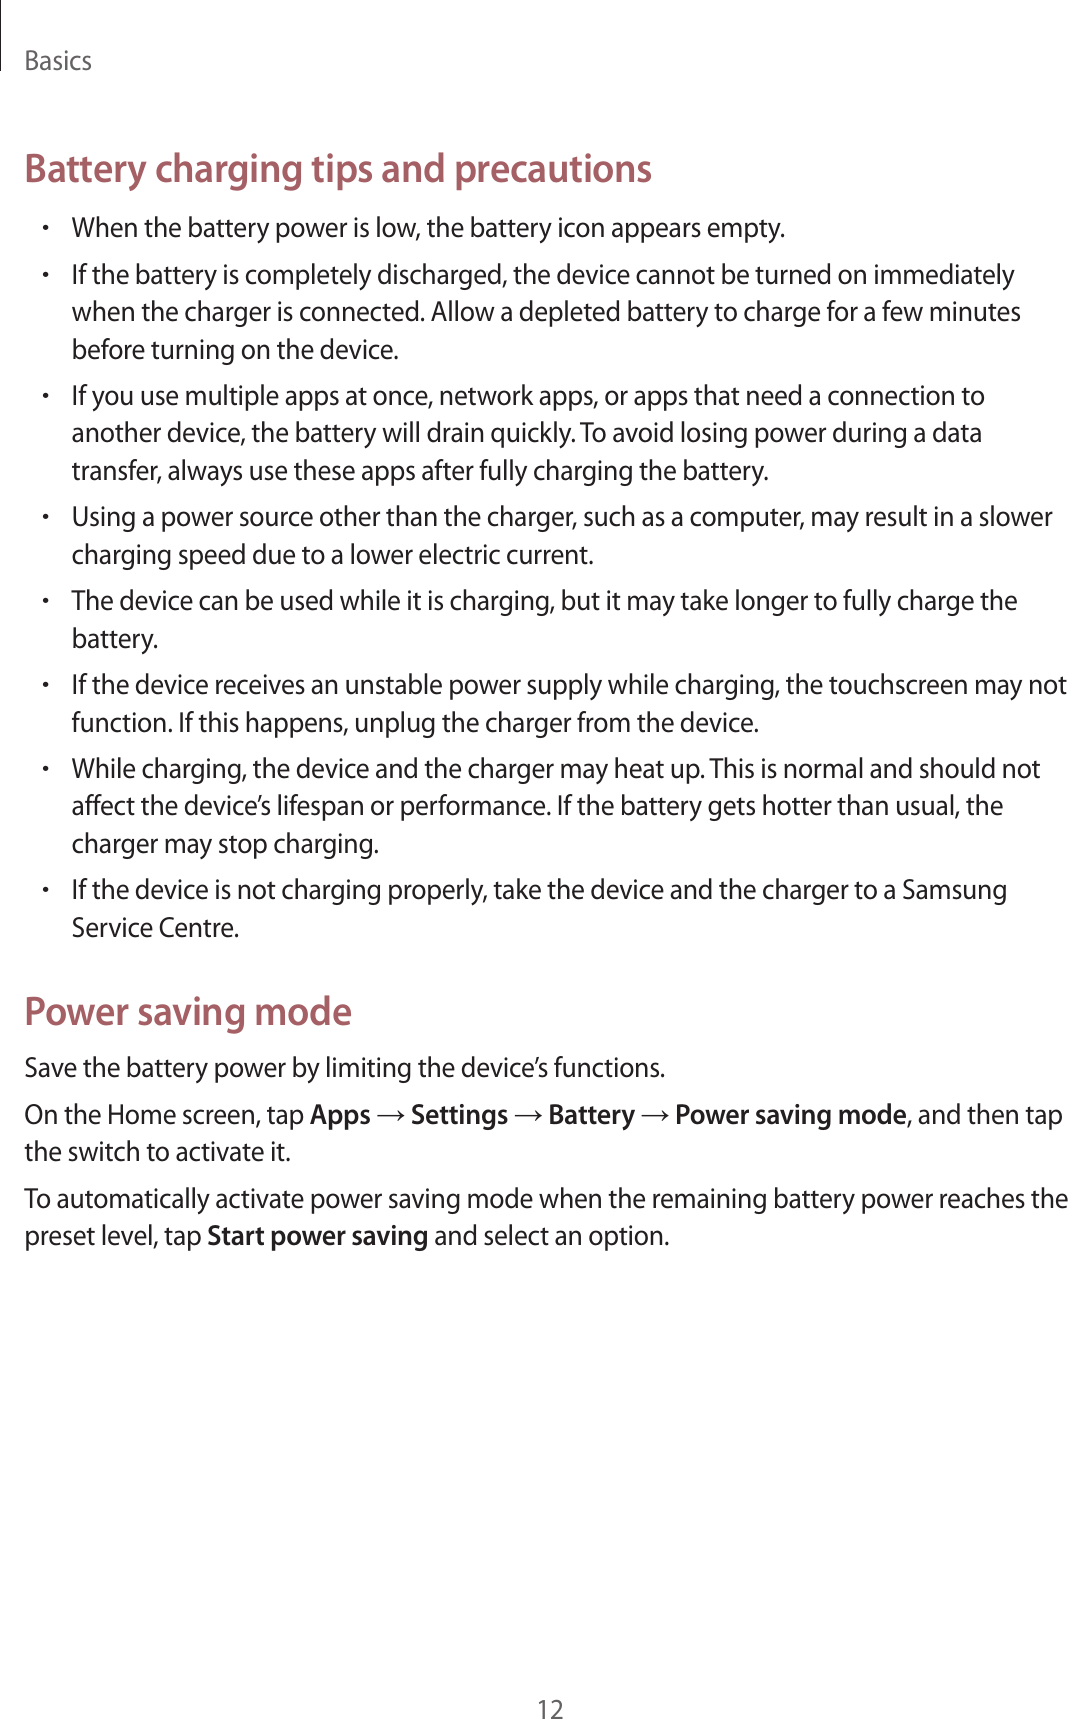 Basics12Battery charging tips and precautions•When the battery power is low, the battery icon appears empty.•If the battery is completely discharged, the device cannot be turned on immediately when the charger is connected. Allow a depleted battery to charge for a few minutes before turning on the device.•If you use multiple apps at once, network apps, or apps that need a connection to another device, the battery will drain quickly. To avoid losing power during a data transfer, always use these apps after fully charging the battery.•Using a power source other than the charger, such as a computer, may result in a slower charging speed due to a lower electric current.•The device can be used while it is charging, but it may take longer to fully charge the battery.•If the device receives an unstable power supply while charging, the touchscreen may not function. If this happens, unplug the charger from the device.•While charging, the device and the charger may heat up. This is normal and should not affect the device’s lifespan or performance. If the battery gets hotter than usual, the charger may stop charging.•If the device is not charging properly, take the device and the charger to a Samsung Service Centre.Power saving modeSave the battery power by limiting the device’s functions.On the Home screen, tap Apps → Settings → Battery → Power saving mode, and then tap the switch to activate it.To automatically activate power saving mode when the remaining battery power reaches the preset level, tap Start power saving and select an option.